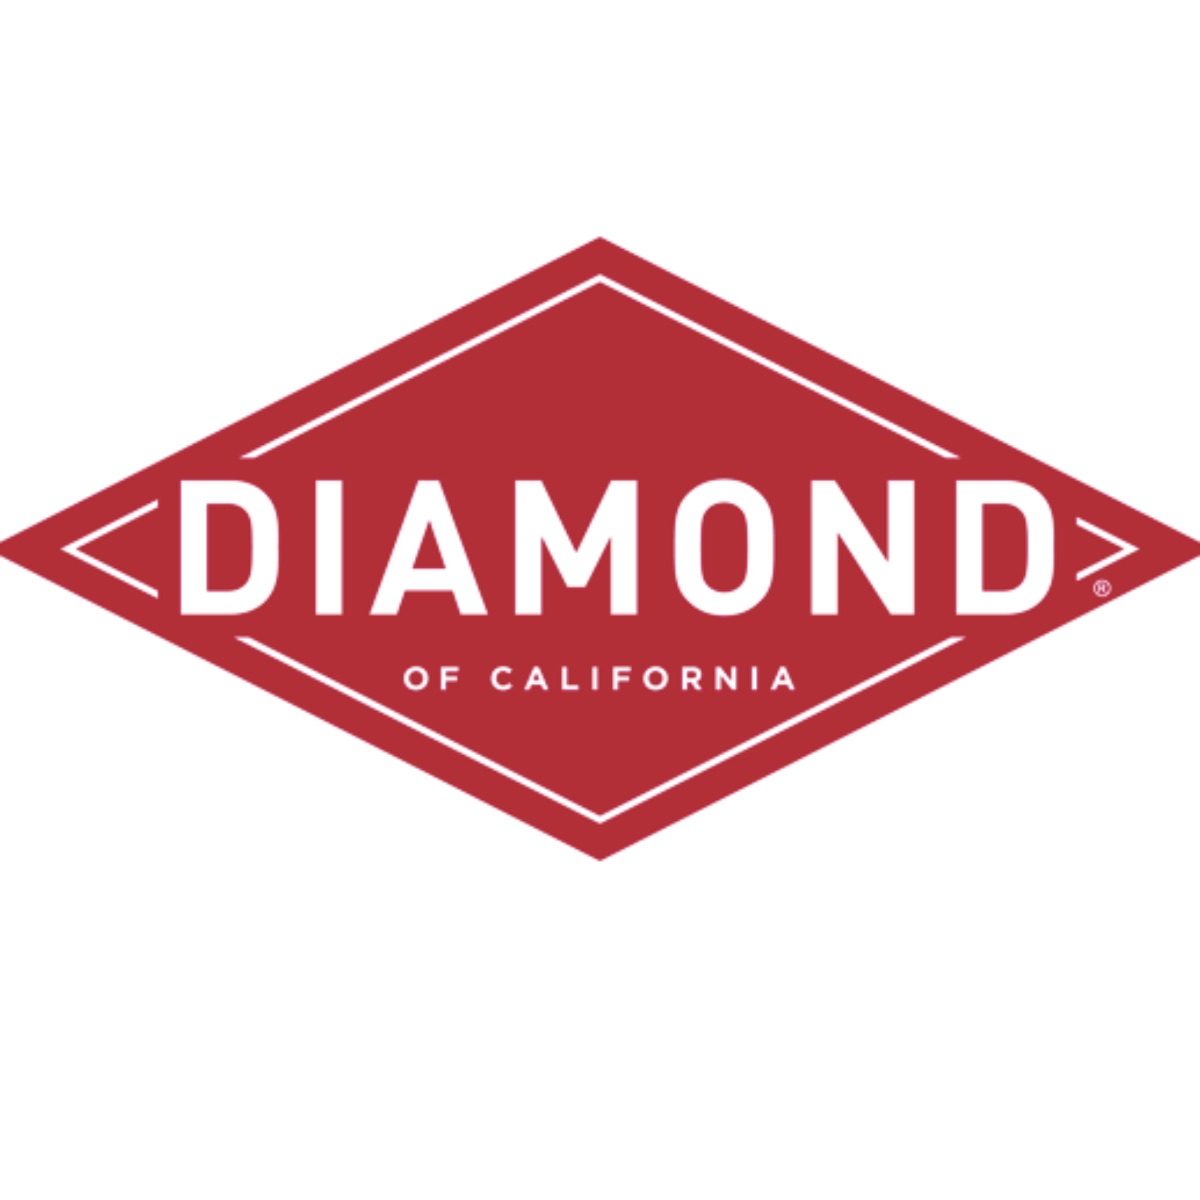 <p><strong><a class="SWhtmlLink" href="http://www.diamondnuts.com" rel="noopener">Diamond Nuts</a>, Stockton</strong></p> <p>Since 99-percent of the walnuts grown in the United States are from California, so it's no surprise that Diamond Nuts has been selling them since 1912. Although the company specializes in non-GMO walnuts, they also package <a class="SWhtmlLink" href="https://www.tasteofhome.com/collection/cooking-with-cashews/" rel="noopener">several other varieties like cashews</a>, almonds and pine nuts.</p>